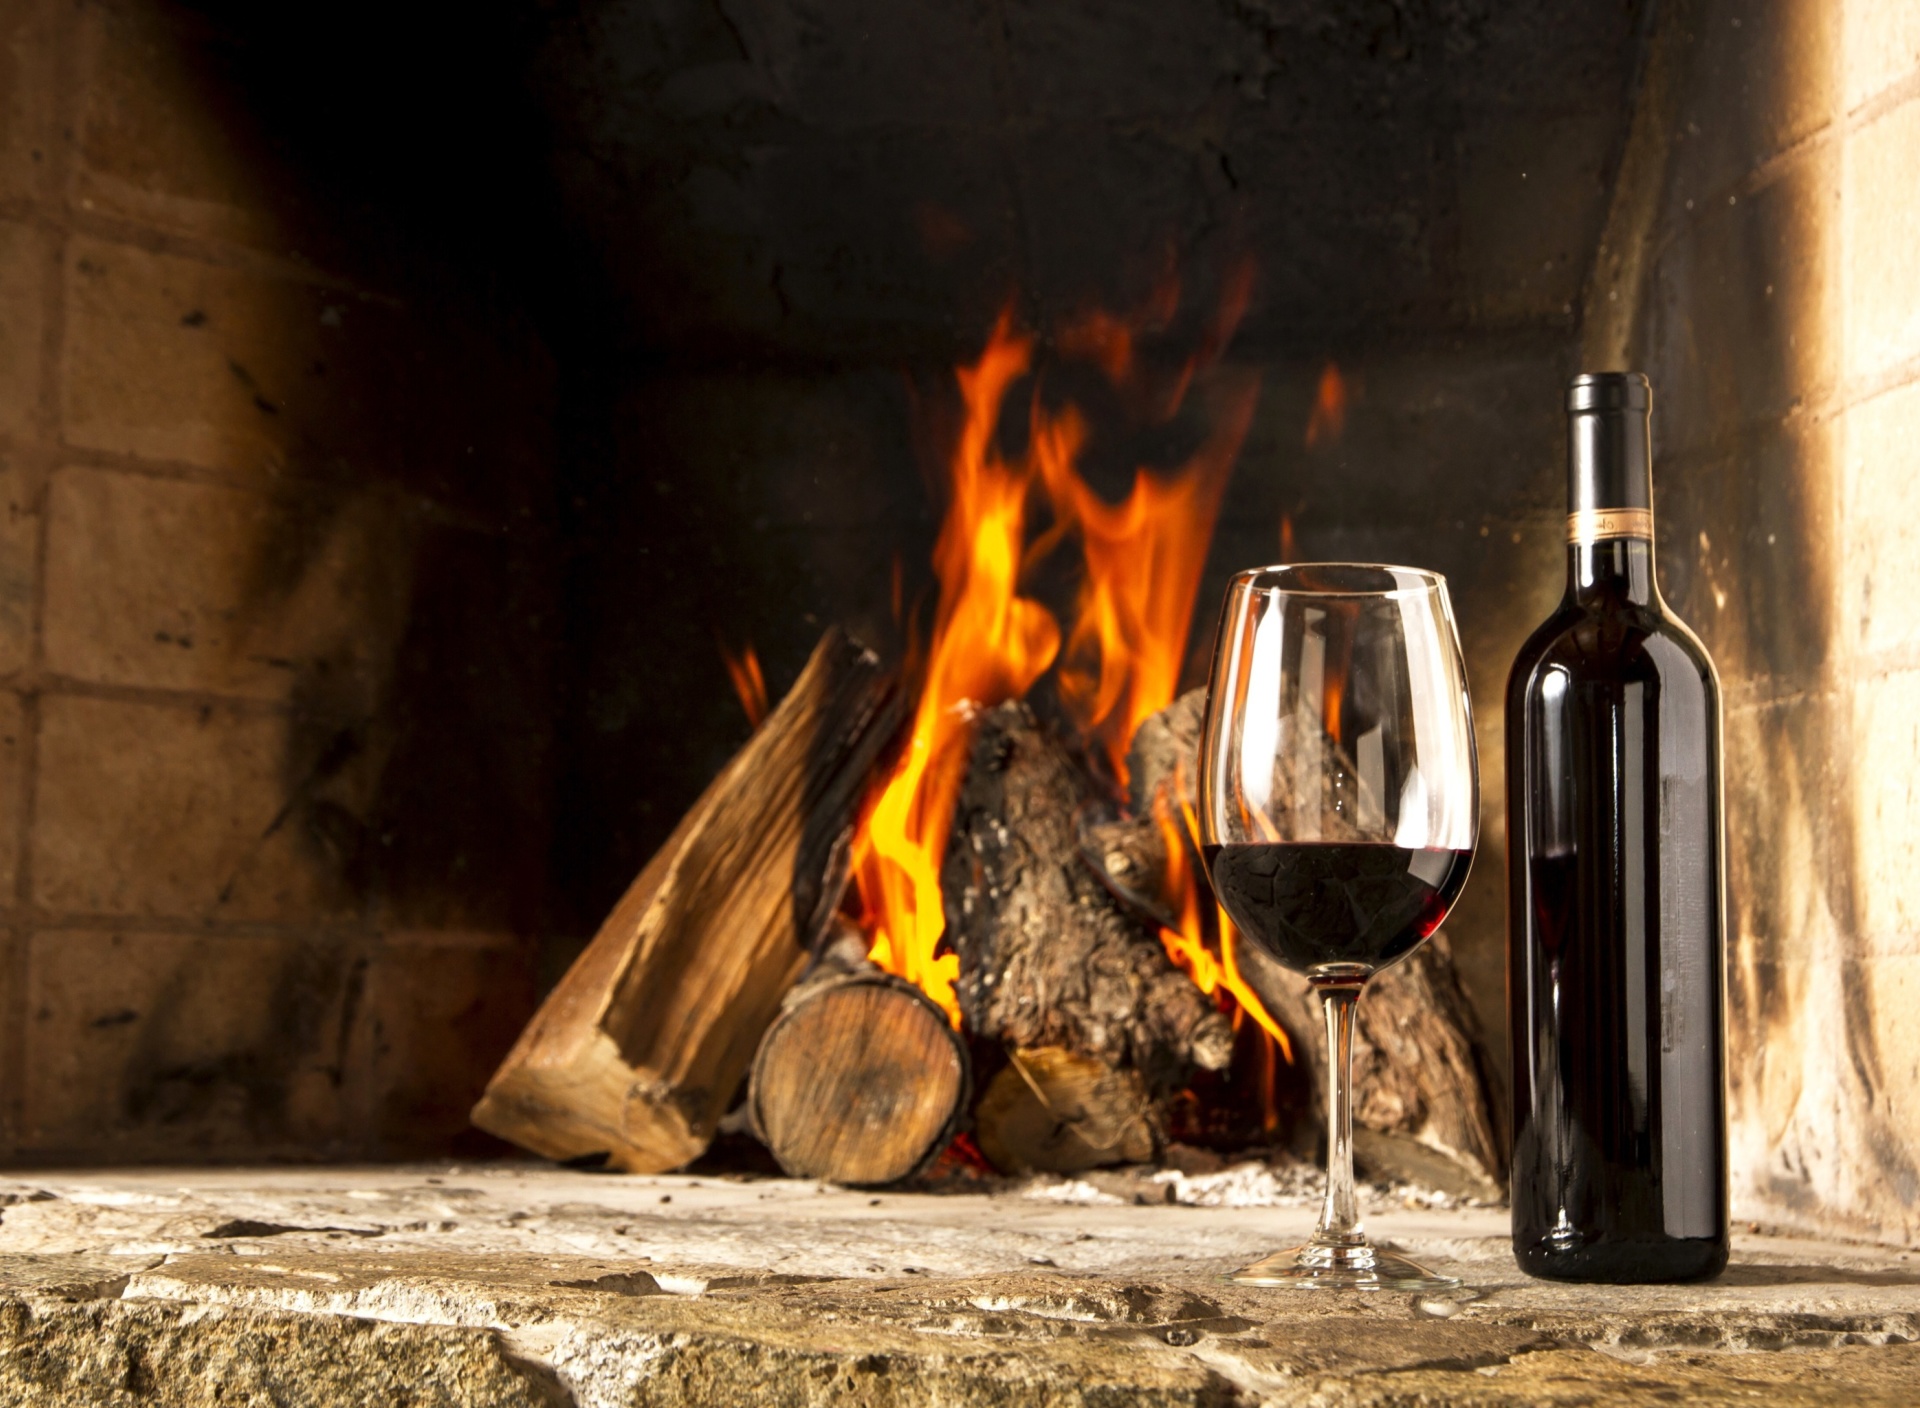 Das Wine and fireplace Wallpaper 1920x1408